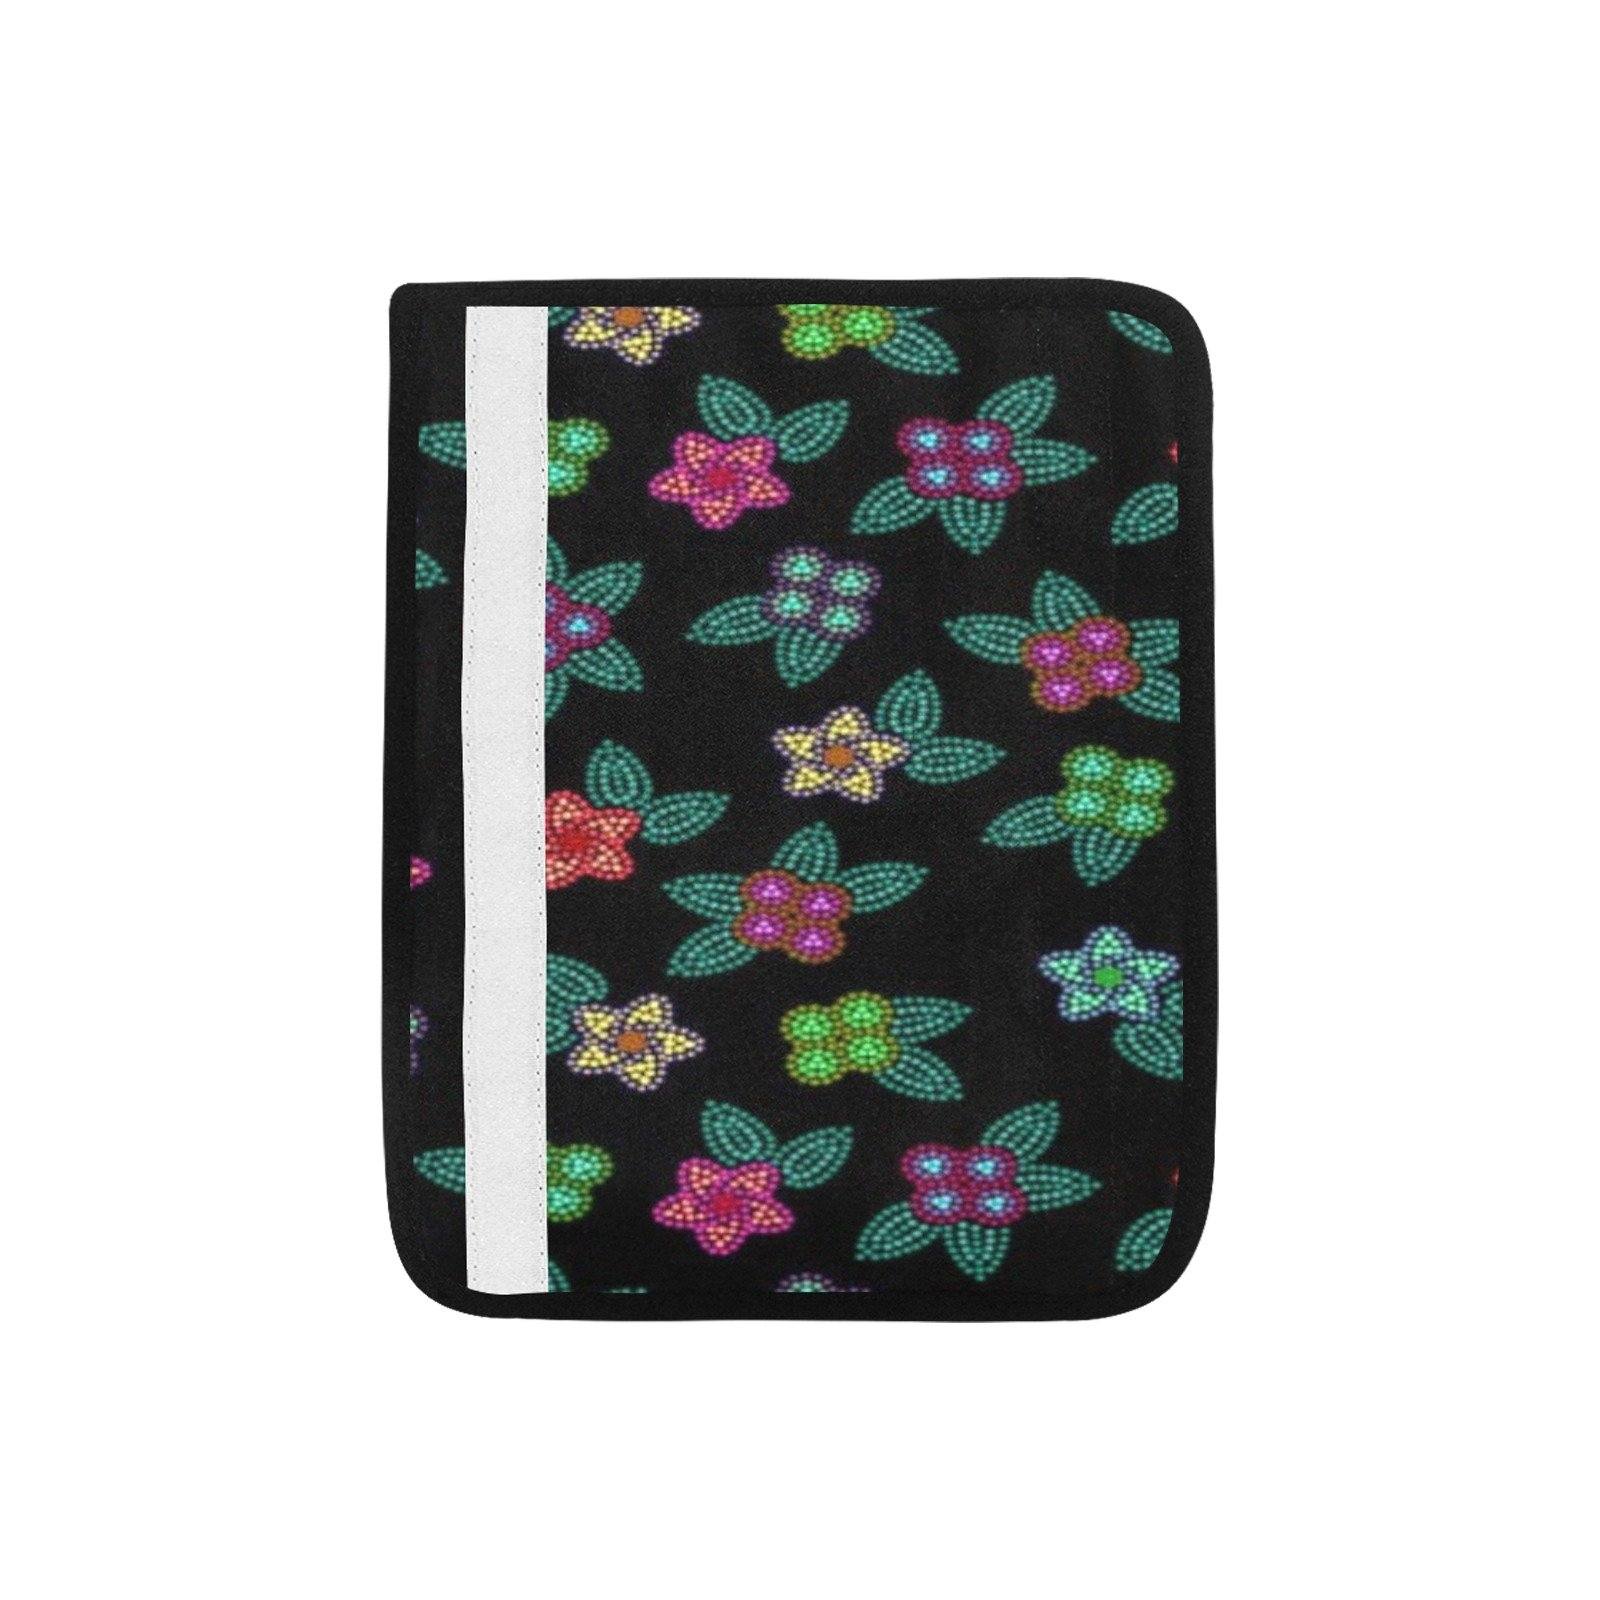 Berry Flowers Black Car Seat Belt Cover 7''x12.6'' (Pack of 2) Car Seat Belt Cover 7x12.6 (Pack of 2) e-joyer 